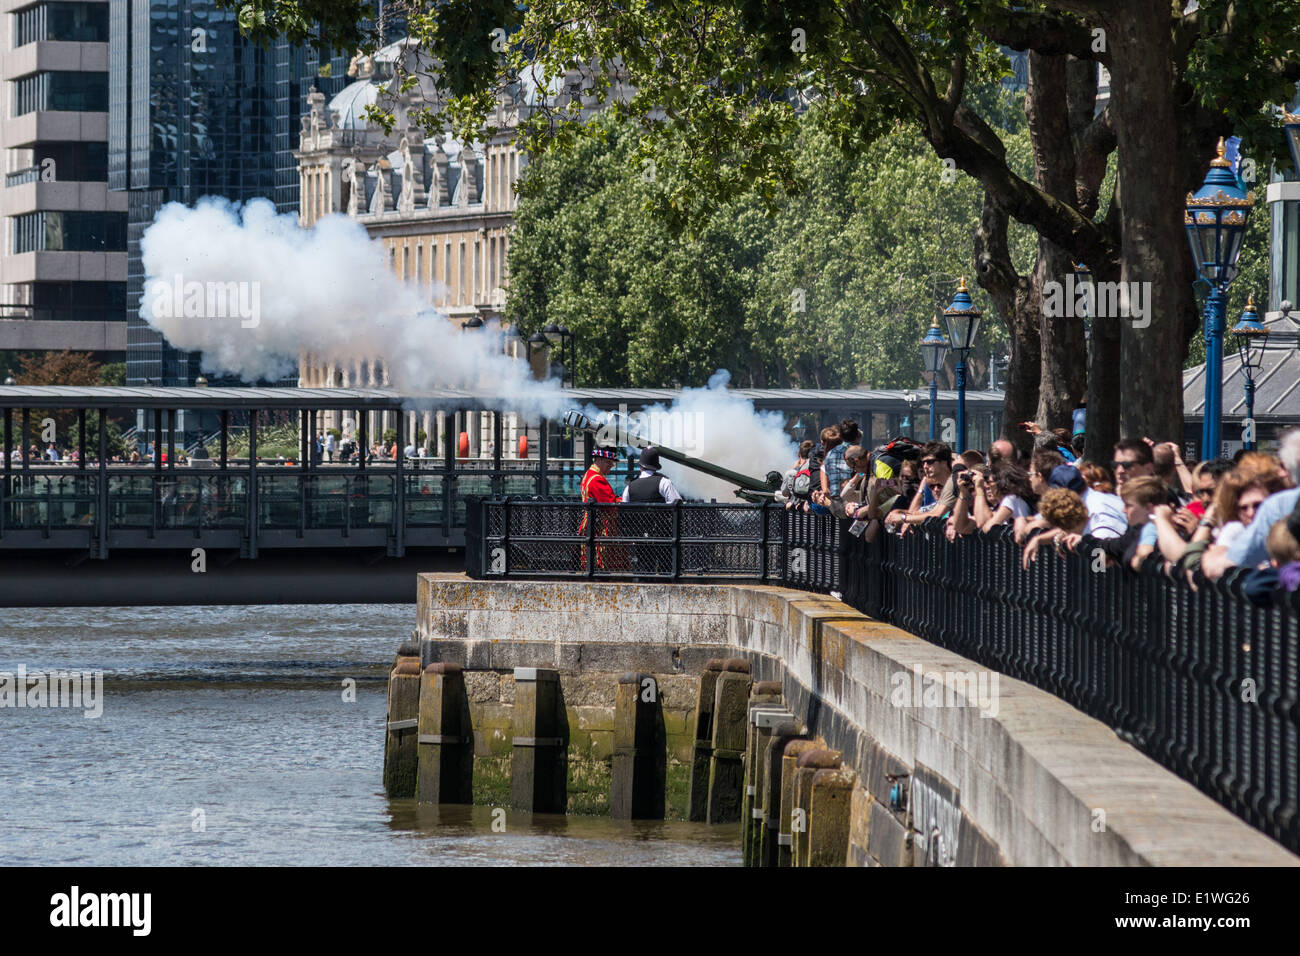 London, UK. 10th June 2014. A 62-Gun salute is fired at the Tower of London to mark HRH the Duke of Edinburgh's 93rd birthday Credit:  Steve Bright/Alamy Live News Stock Photo